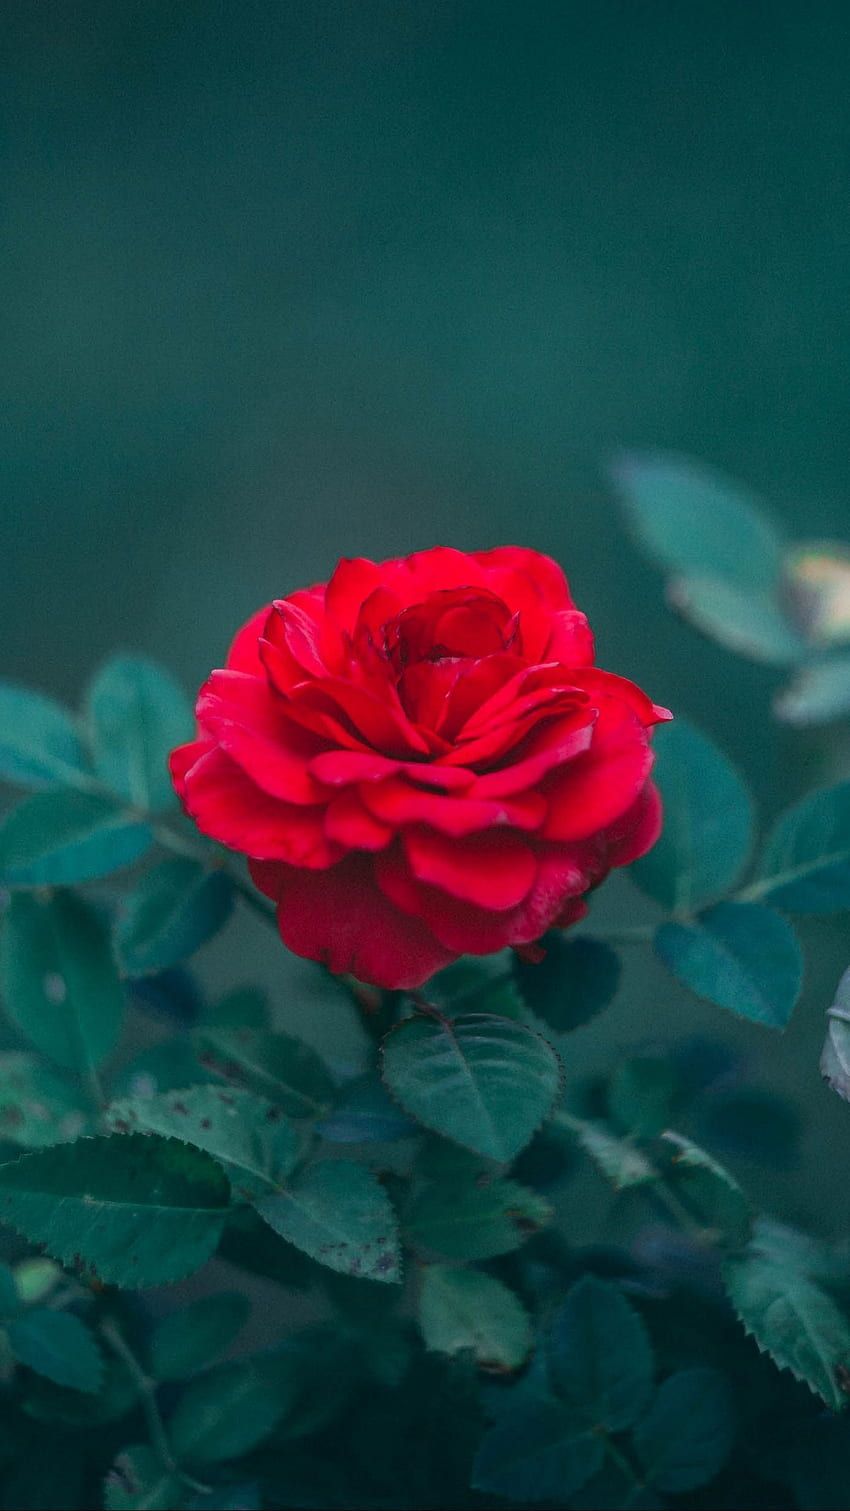 A red rose with green leaves in the background - Blurry, roses